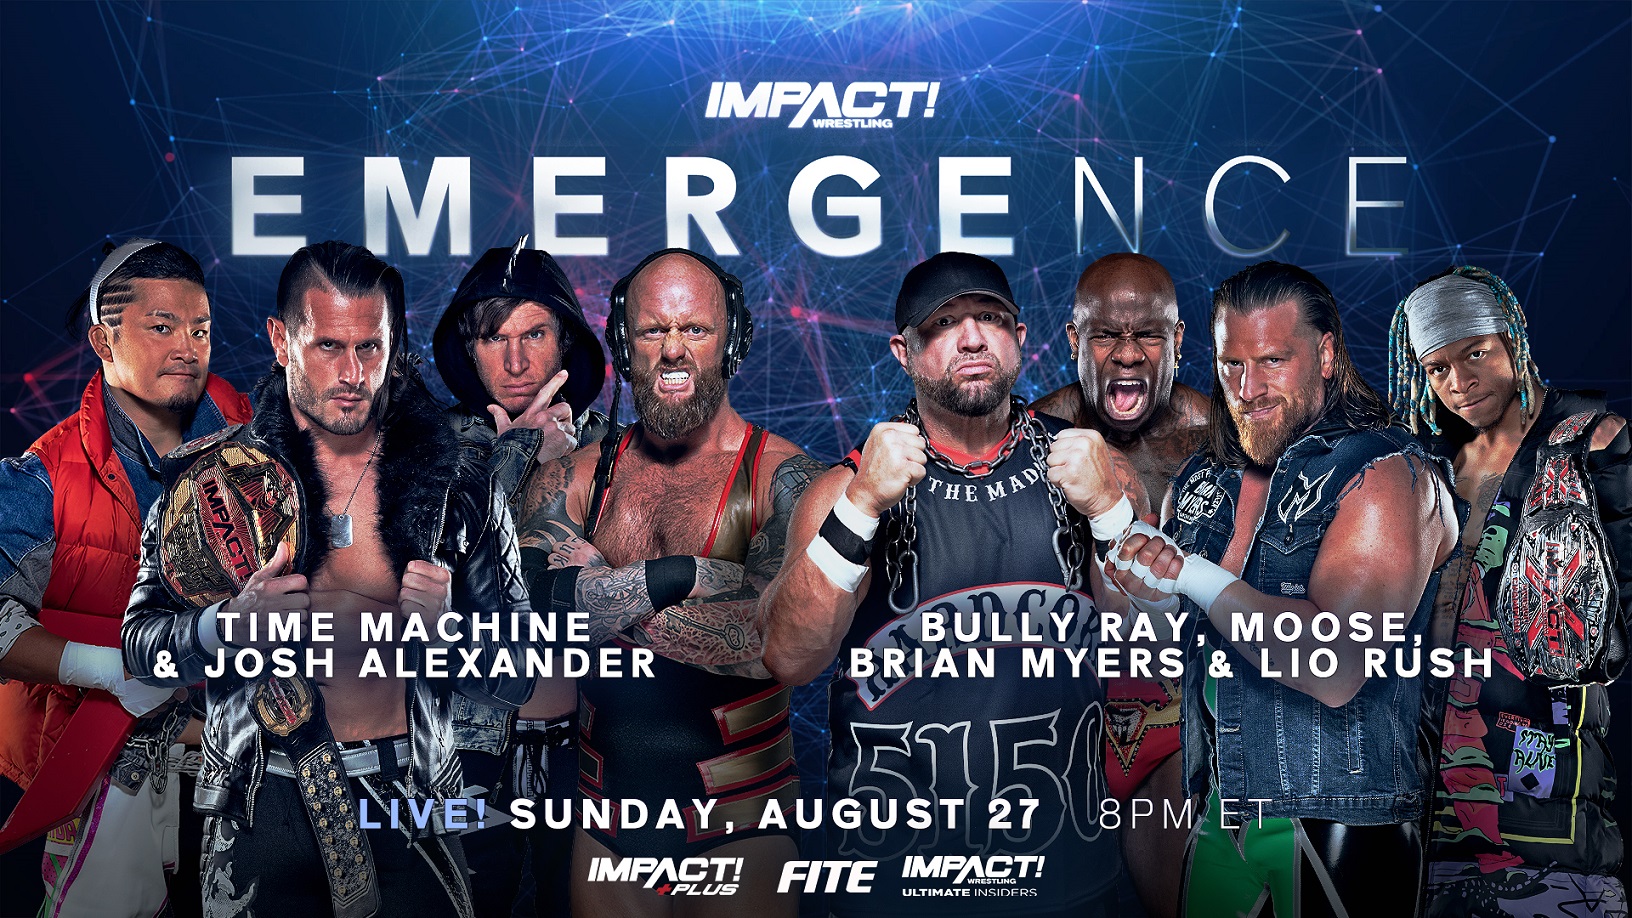 Moose will team with Brian Myers, Lio Rush and Bully Ray at Emergence.